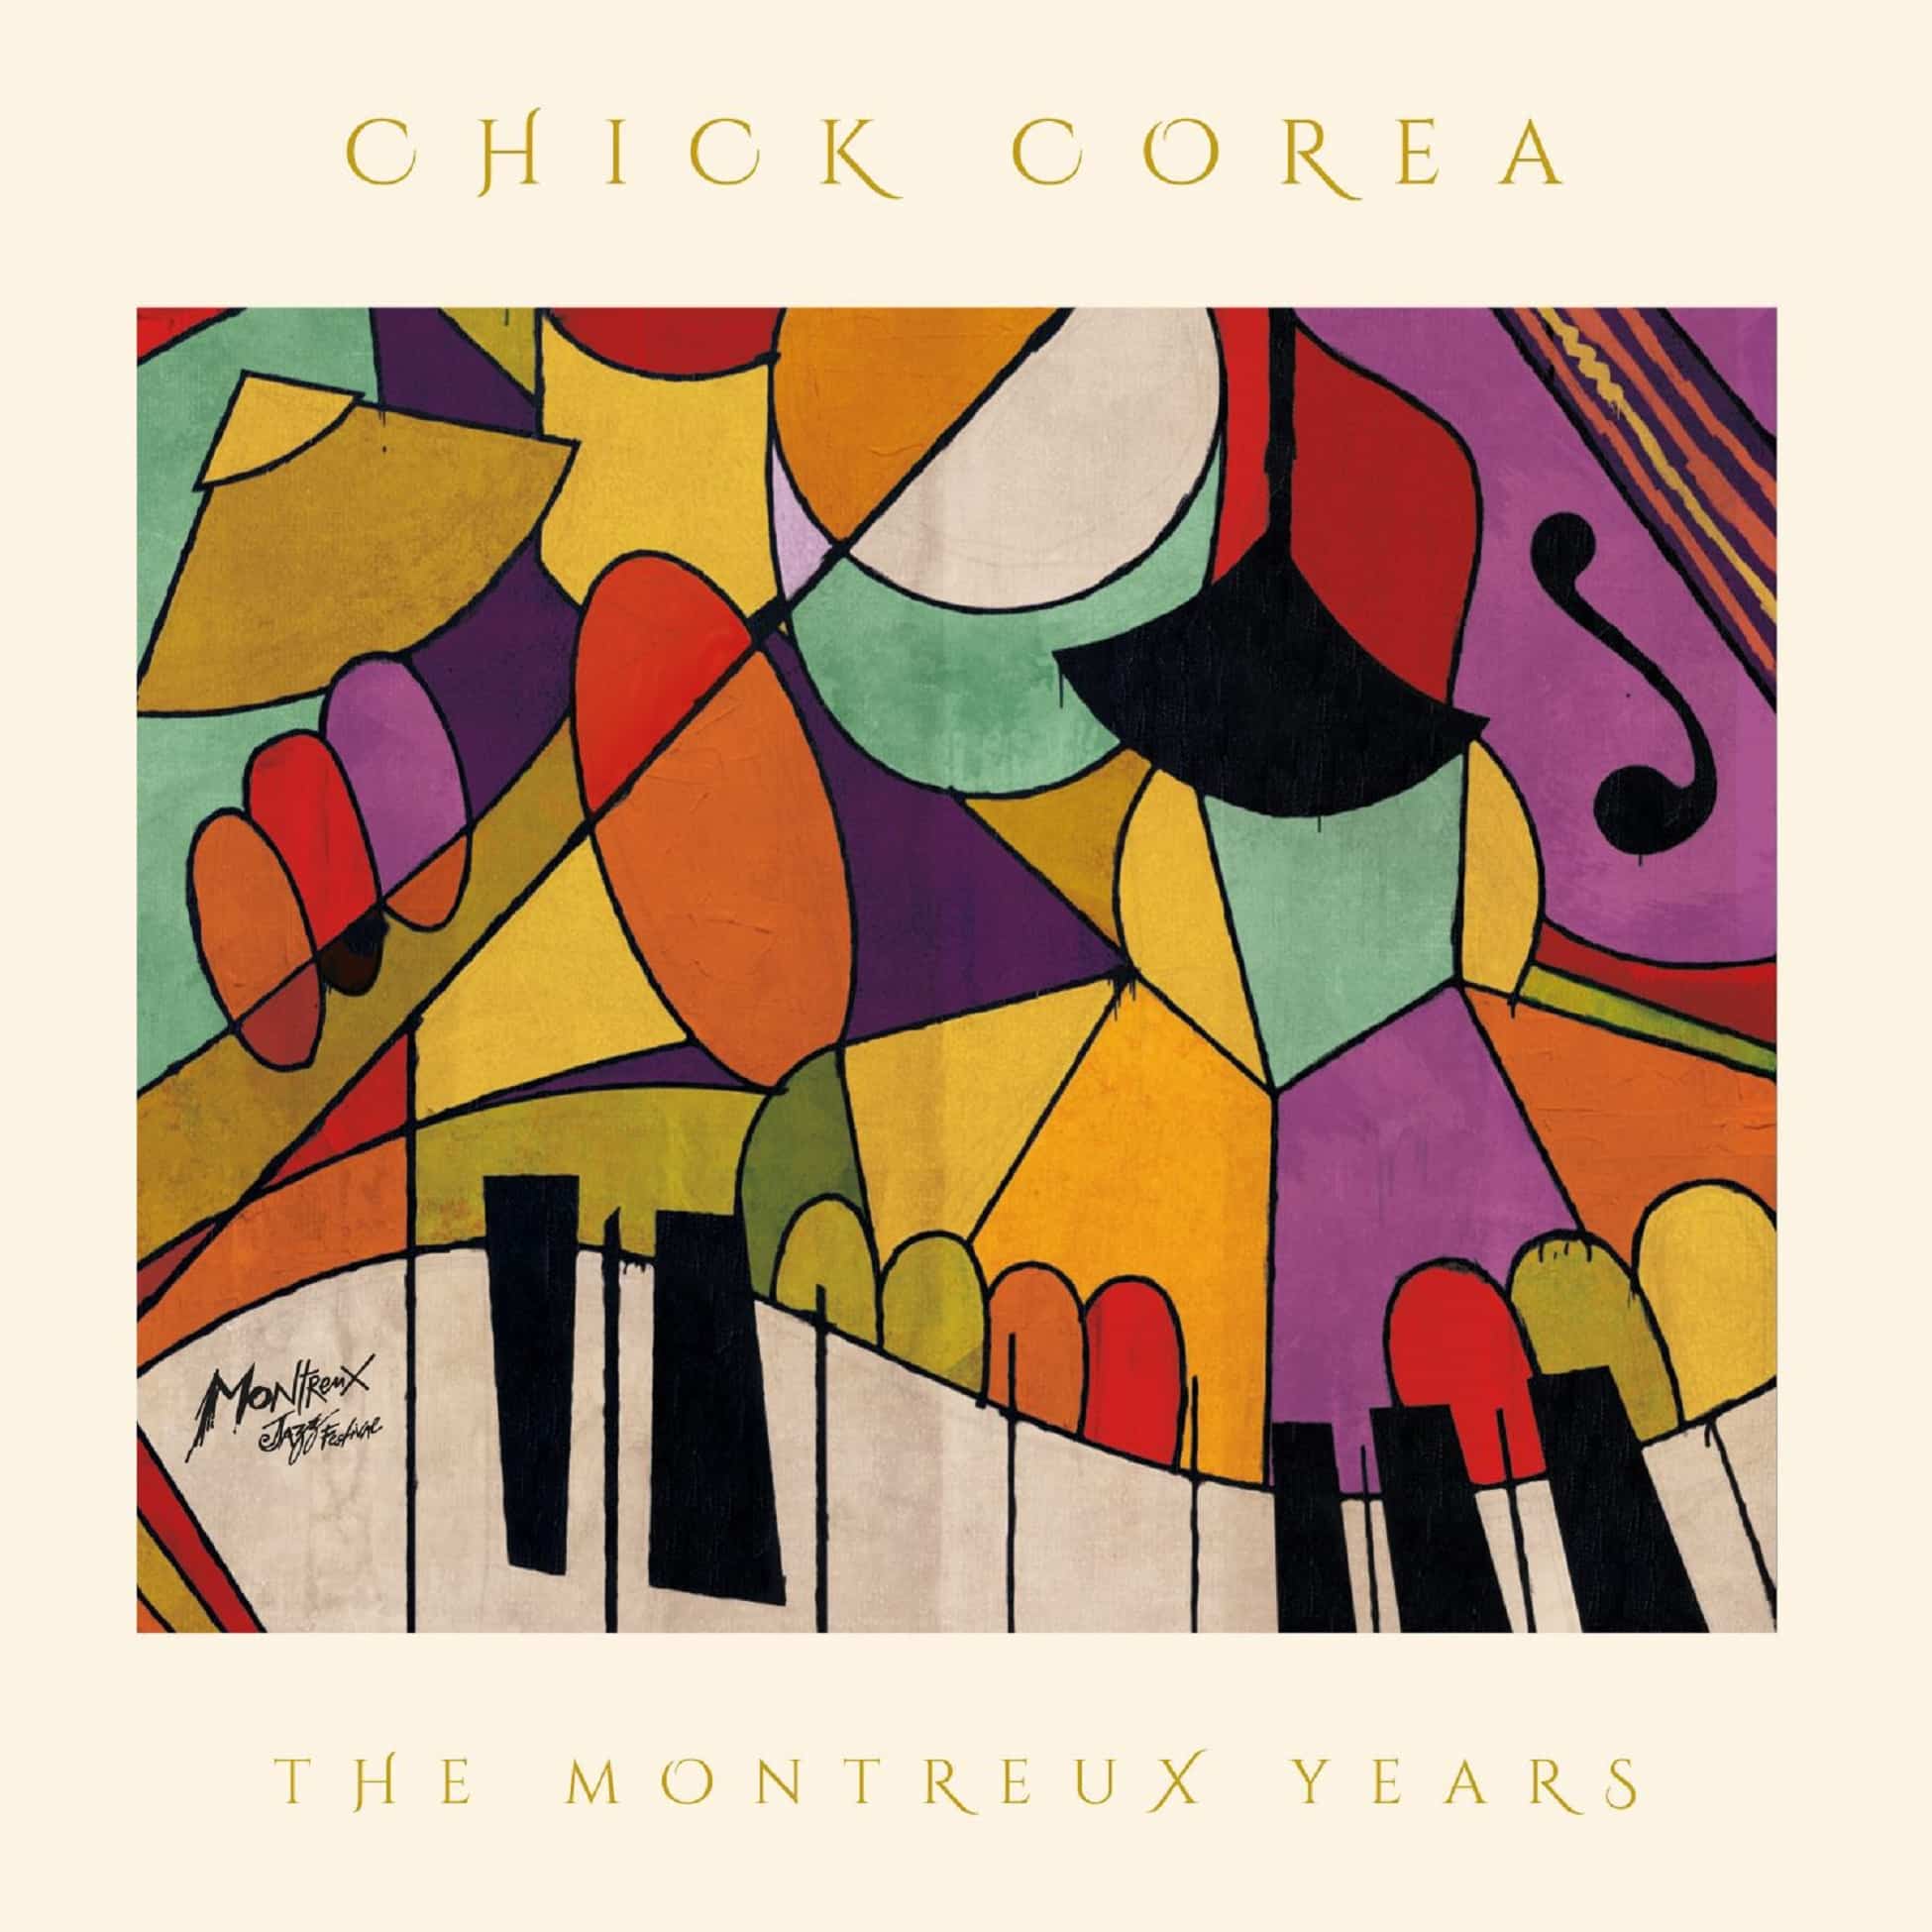 CHICK COREA - THE MONTREUX YEARS